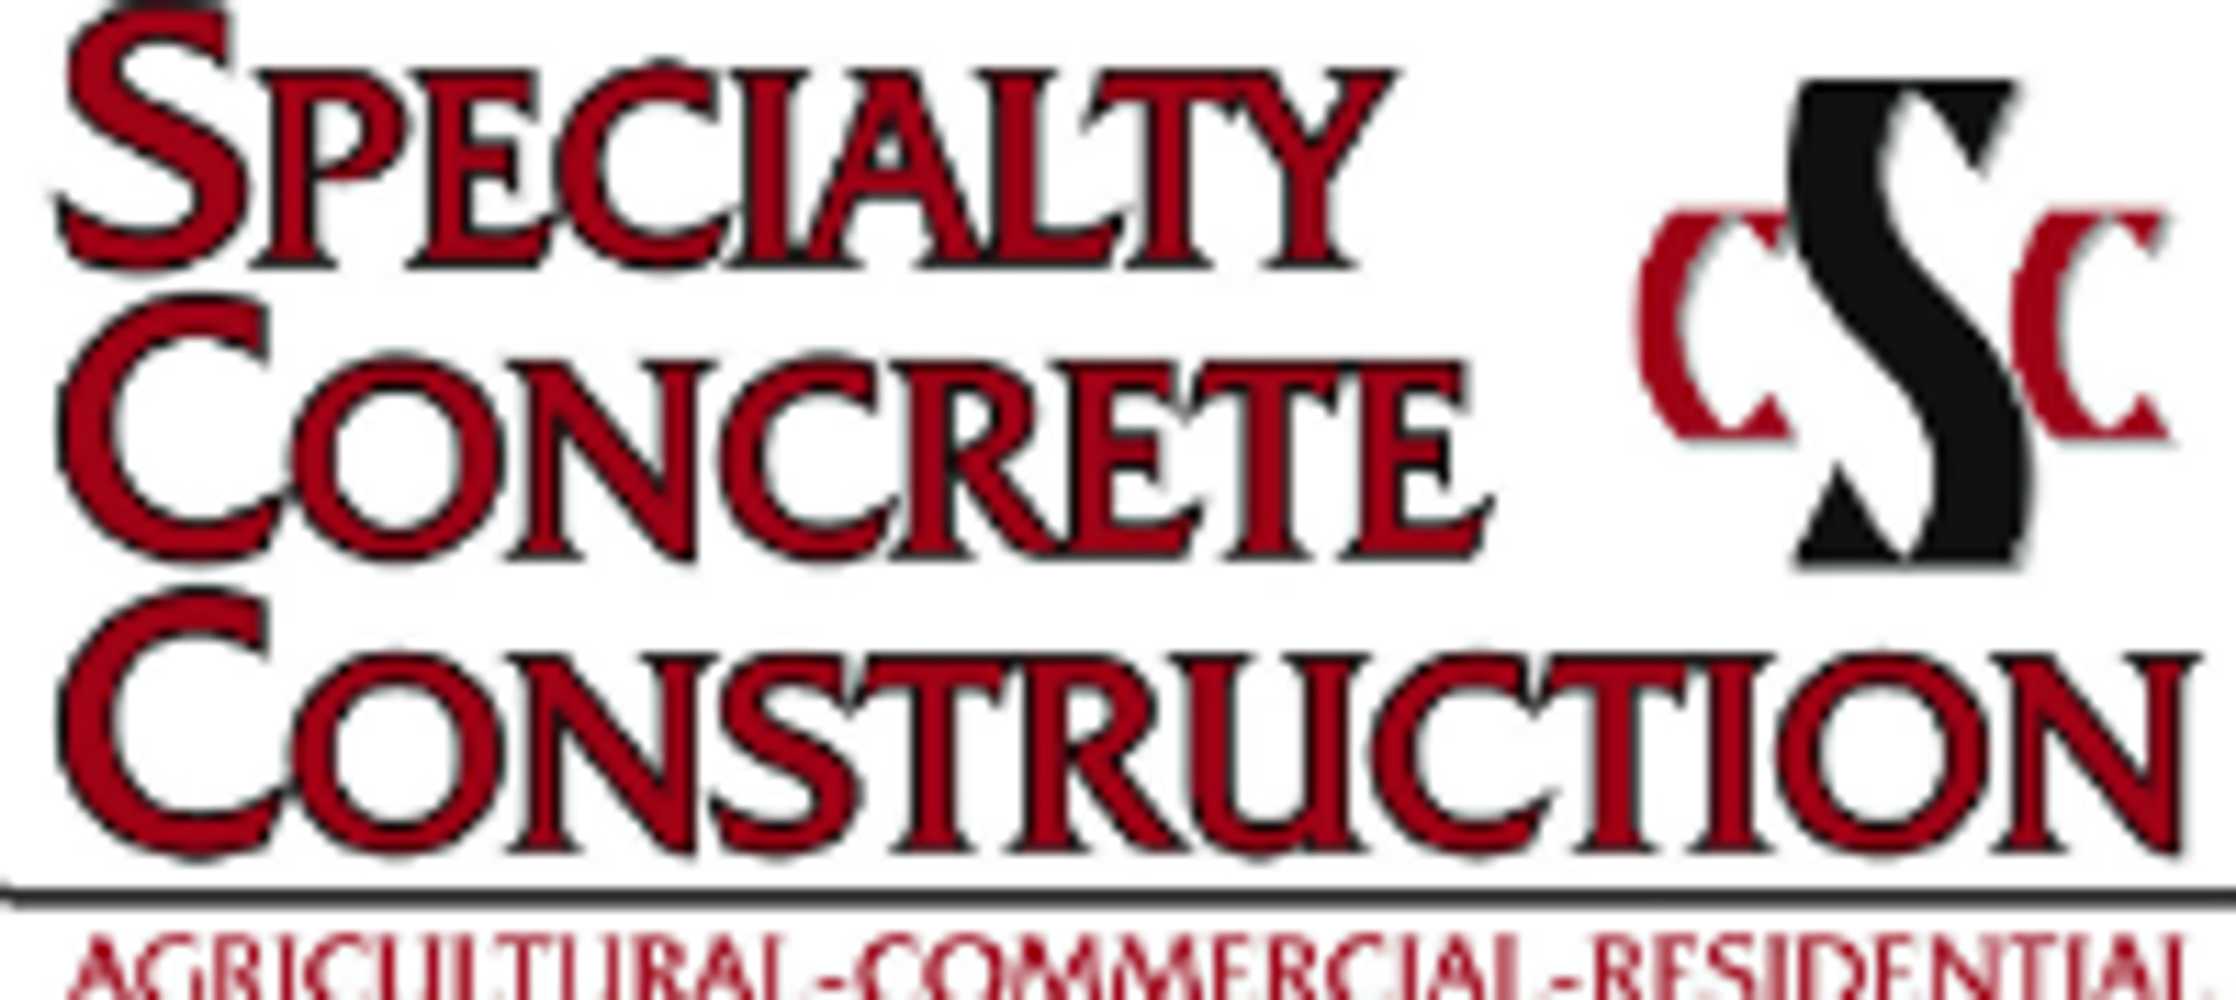 Photo(s) from Specialty Concrete Construction LLC